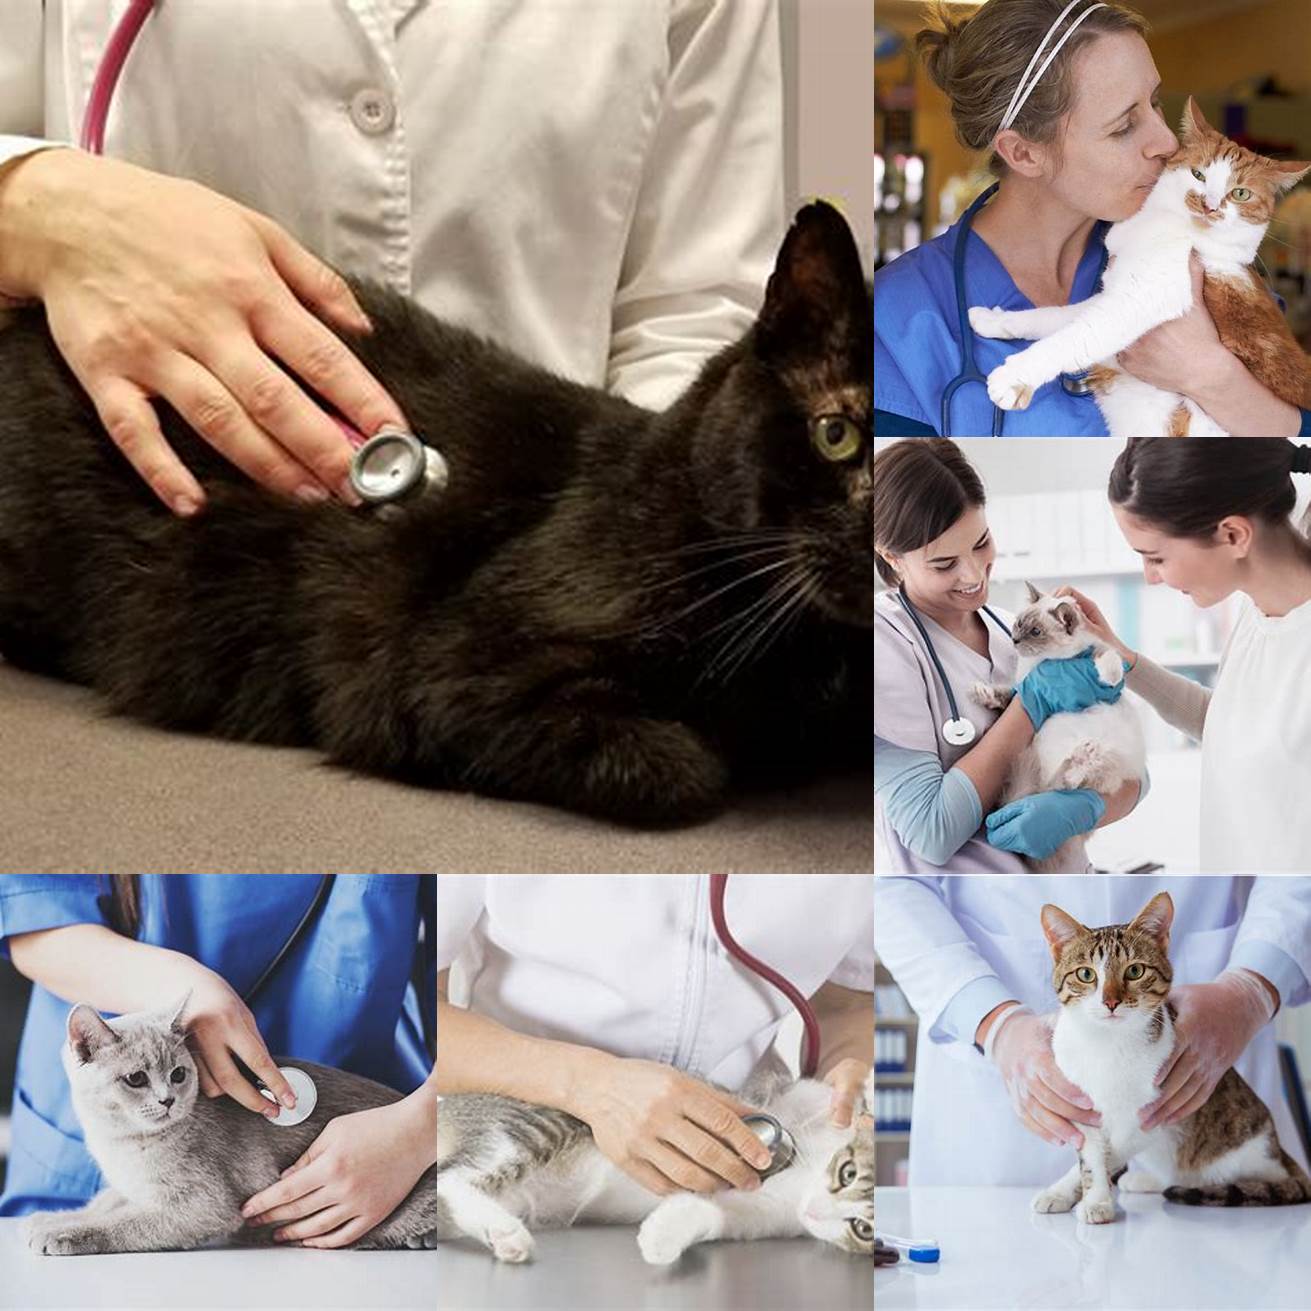 Schedule regular check-ups with a veterinarian